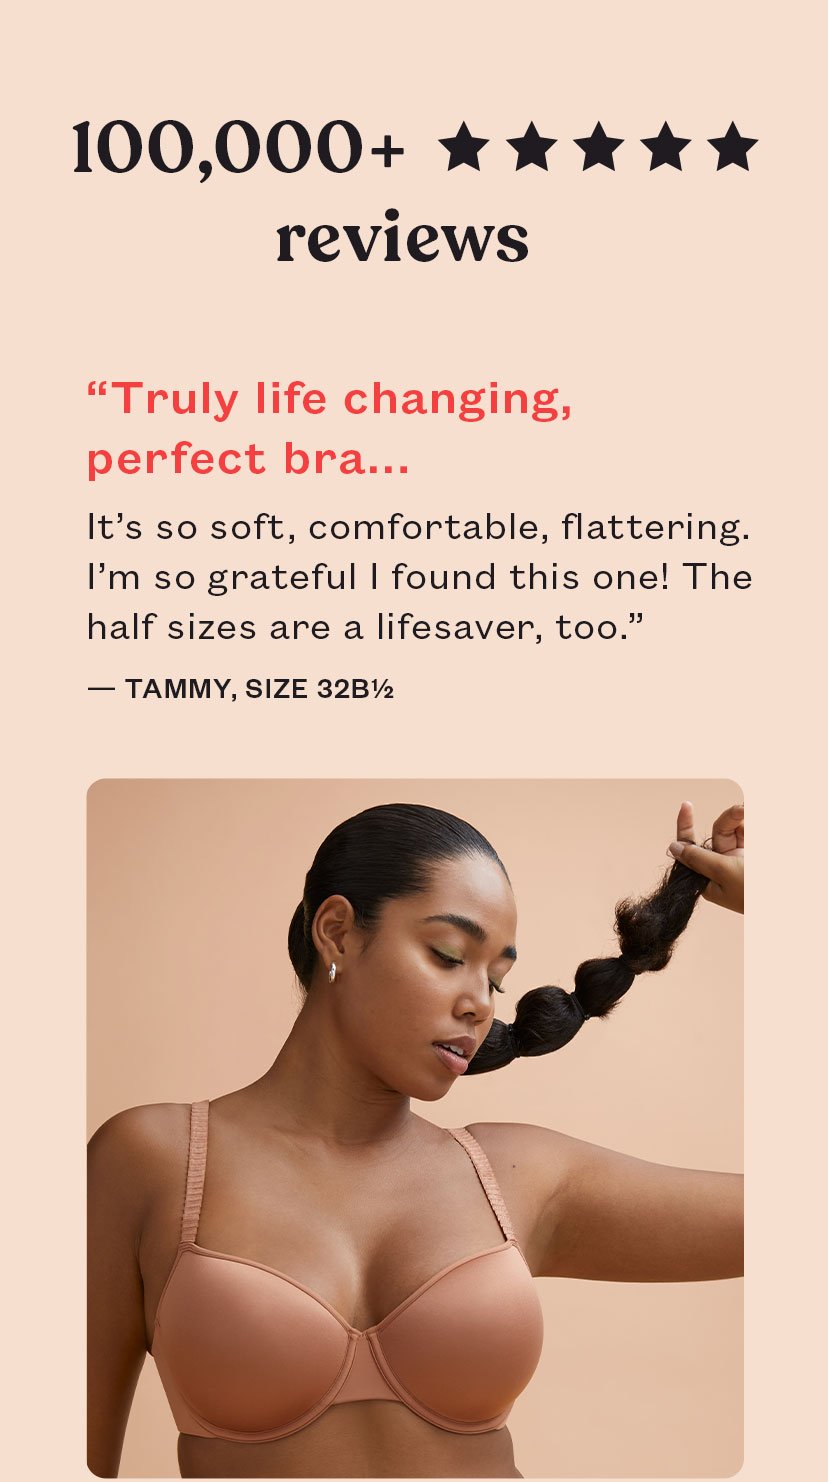 'Truly life changing, perfect bra...'